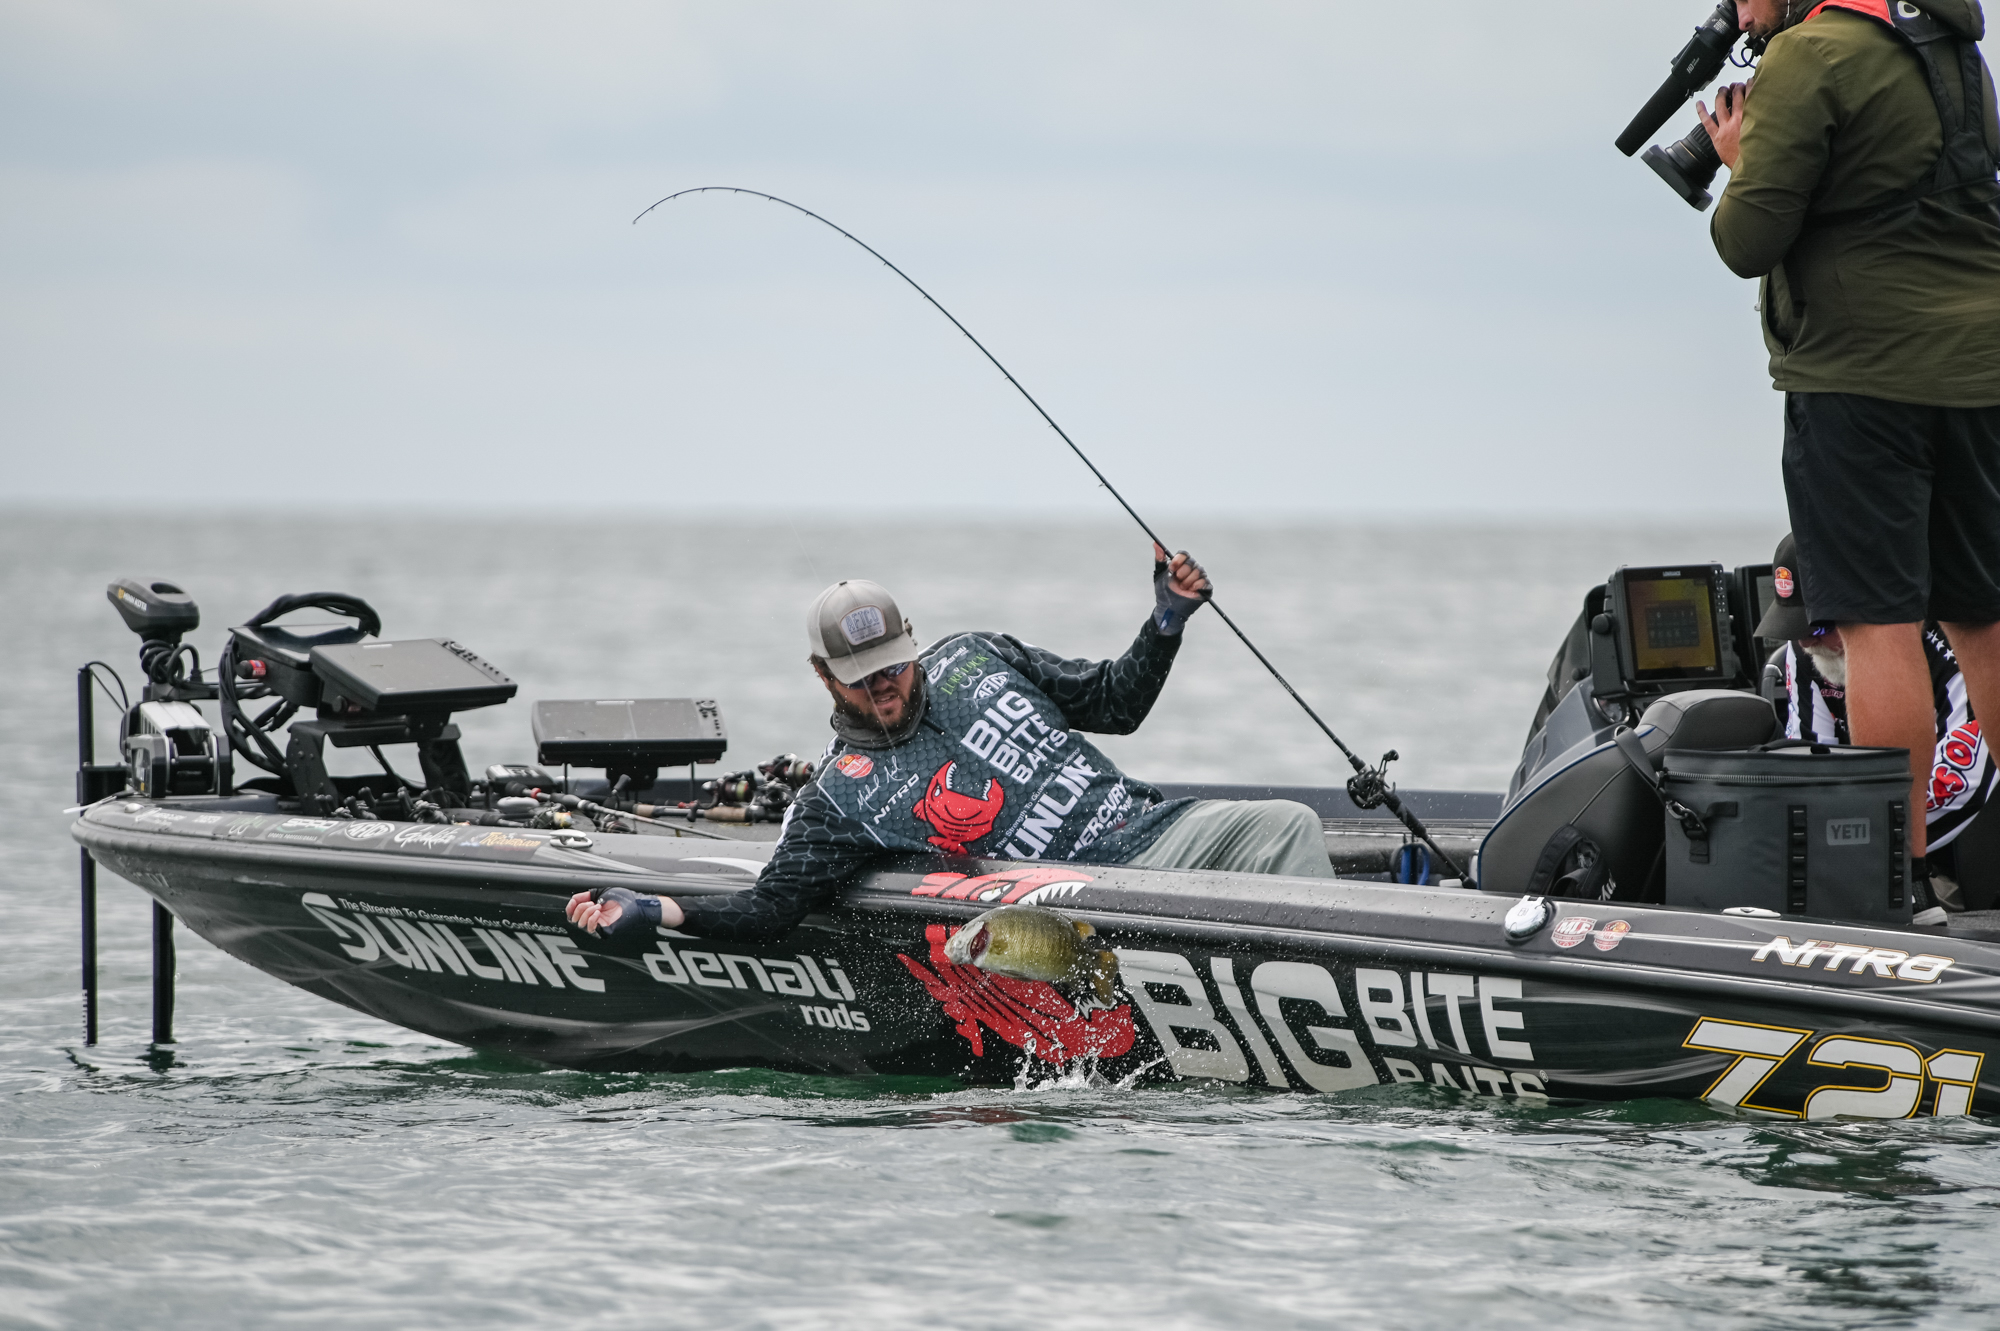 GALLERY: Michael Neal Seals the Deal - Major League Fishing